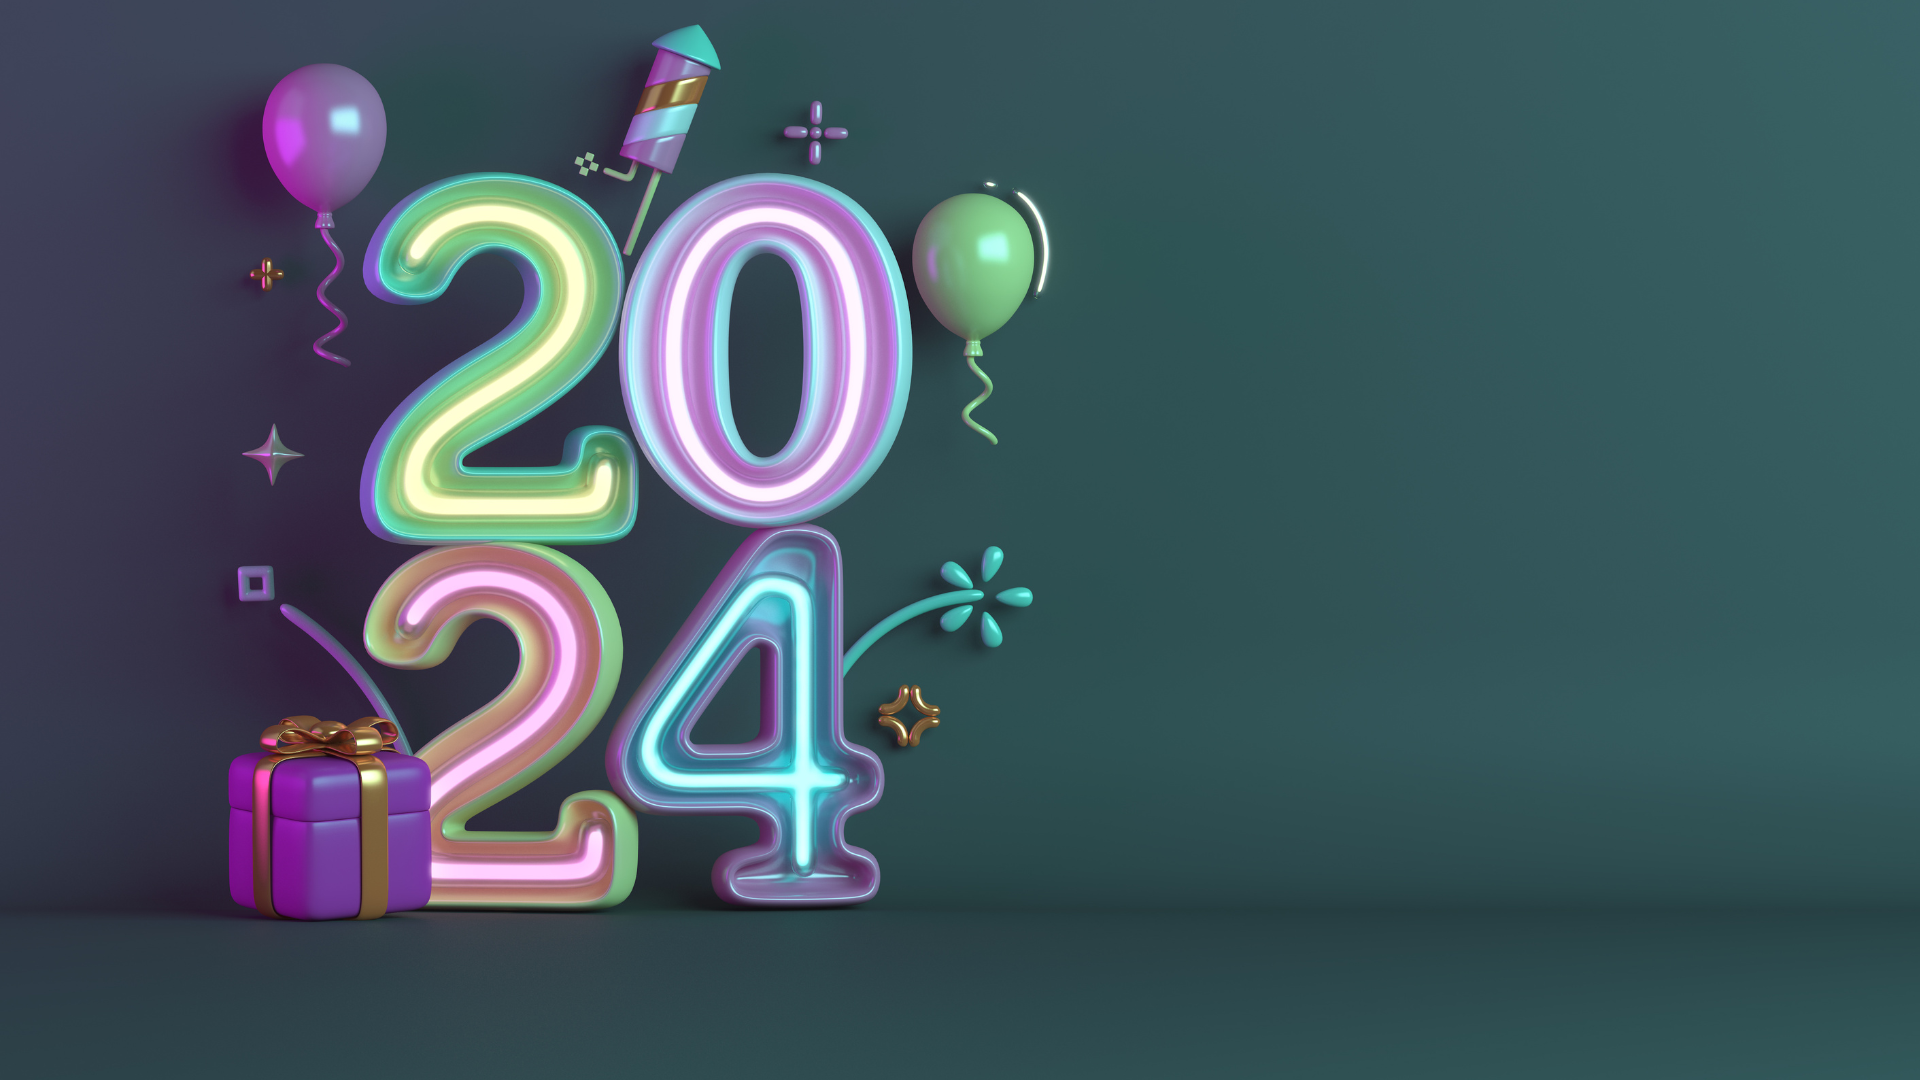 Neon "2024" with balloons around it on a navy background